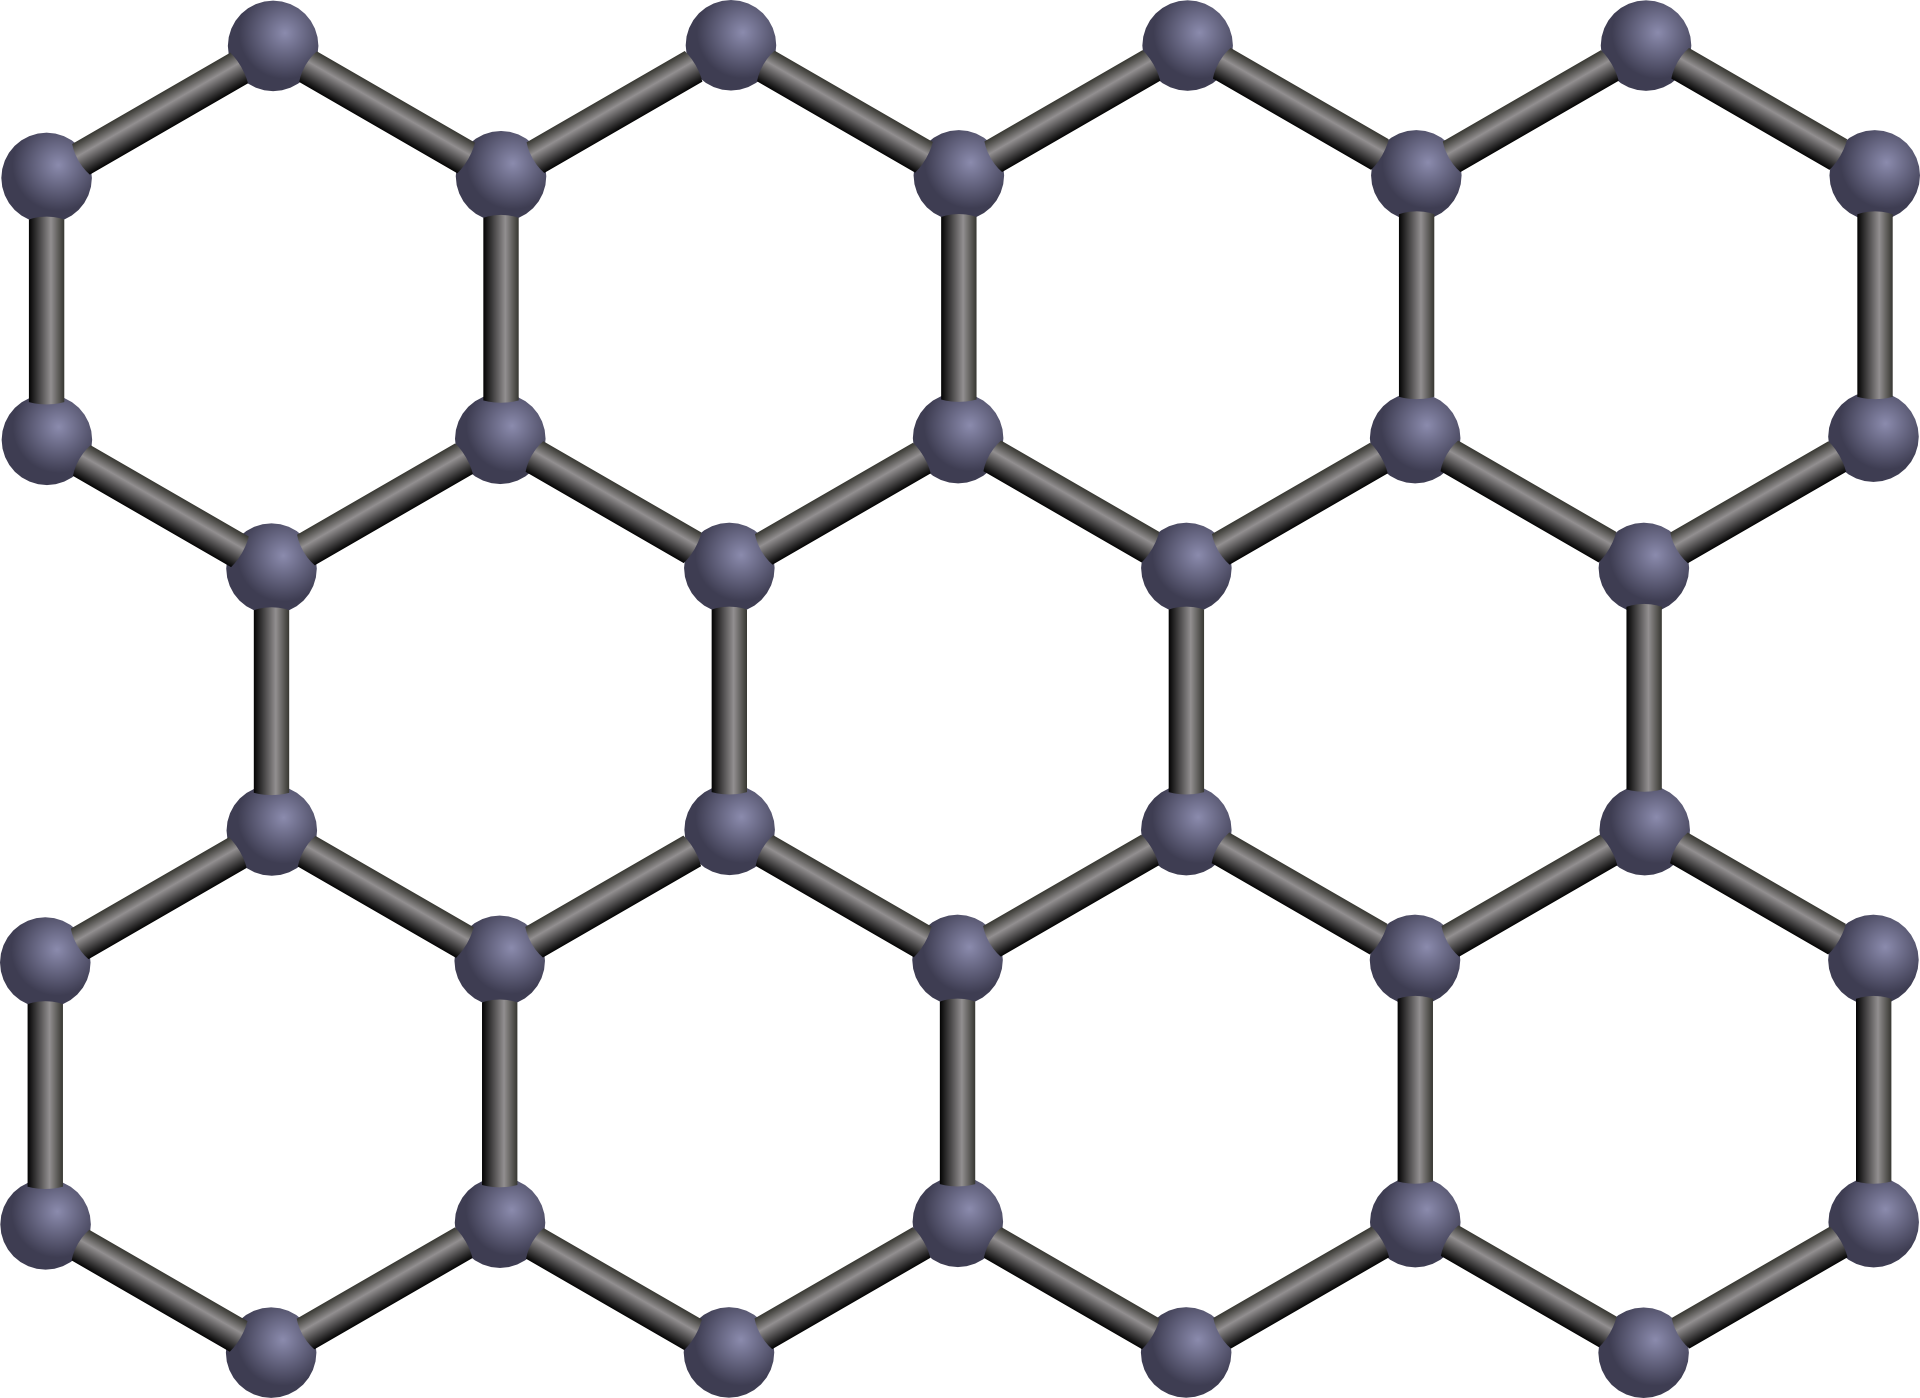 A network made up of hexagons containing black lines connected by spherical beads